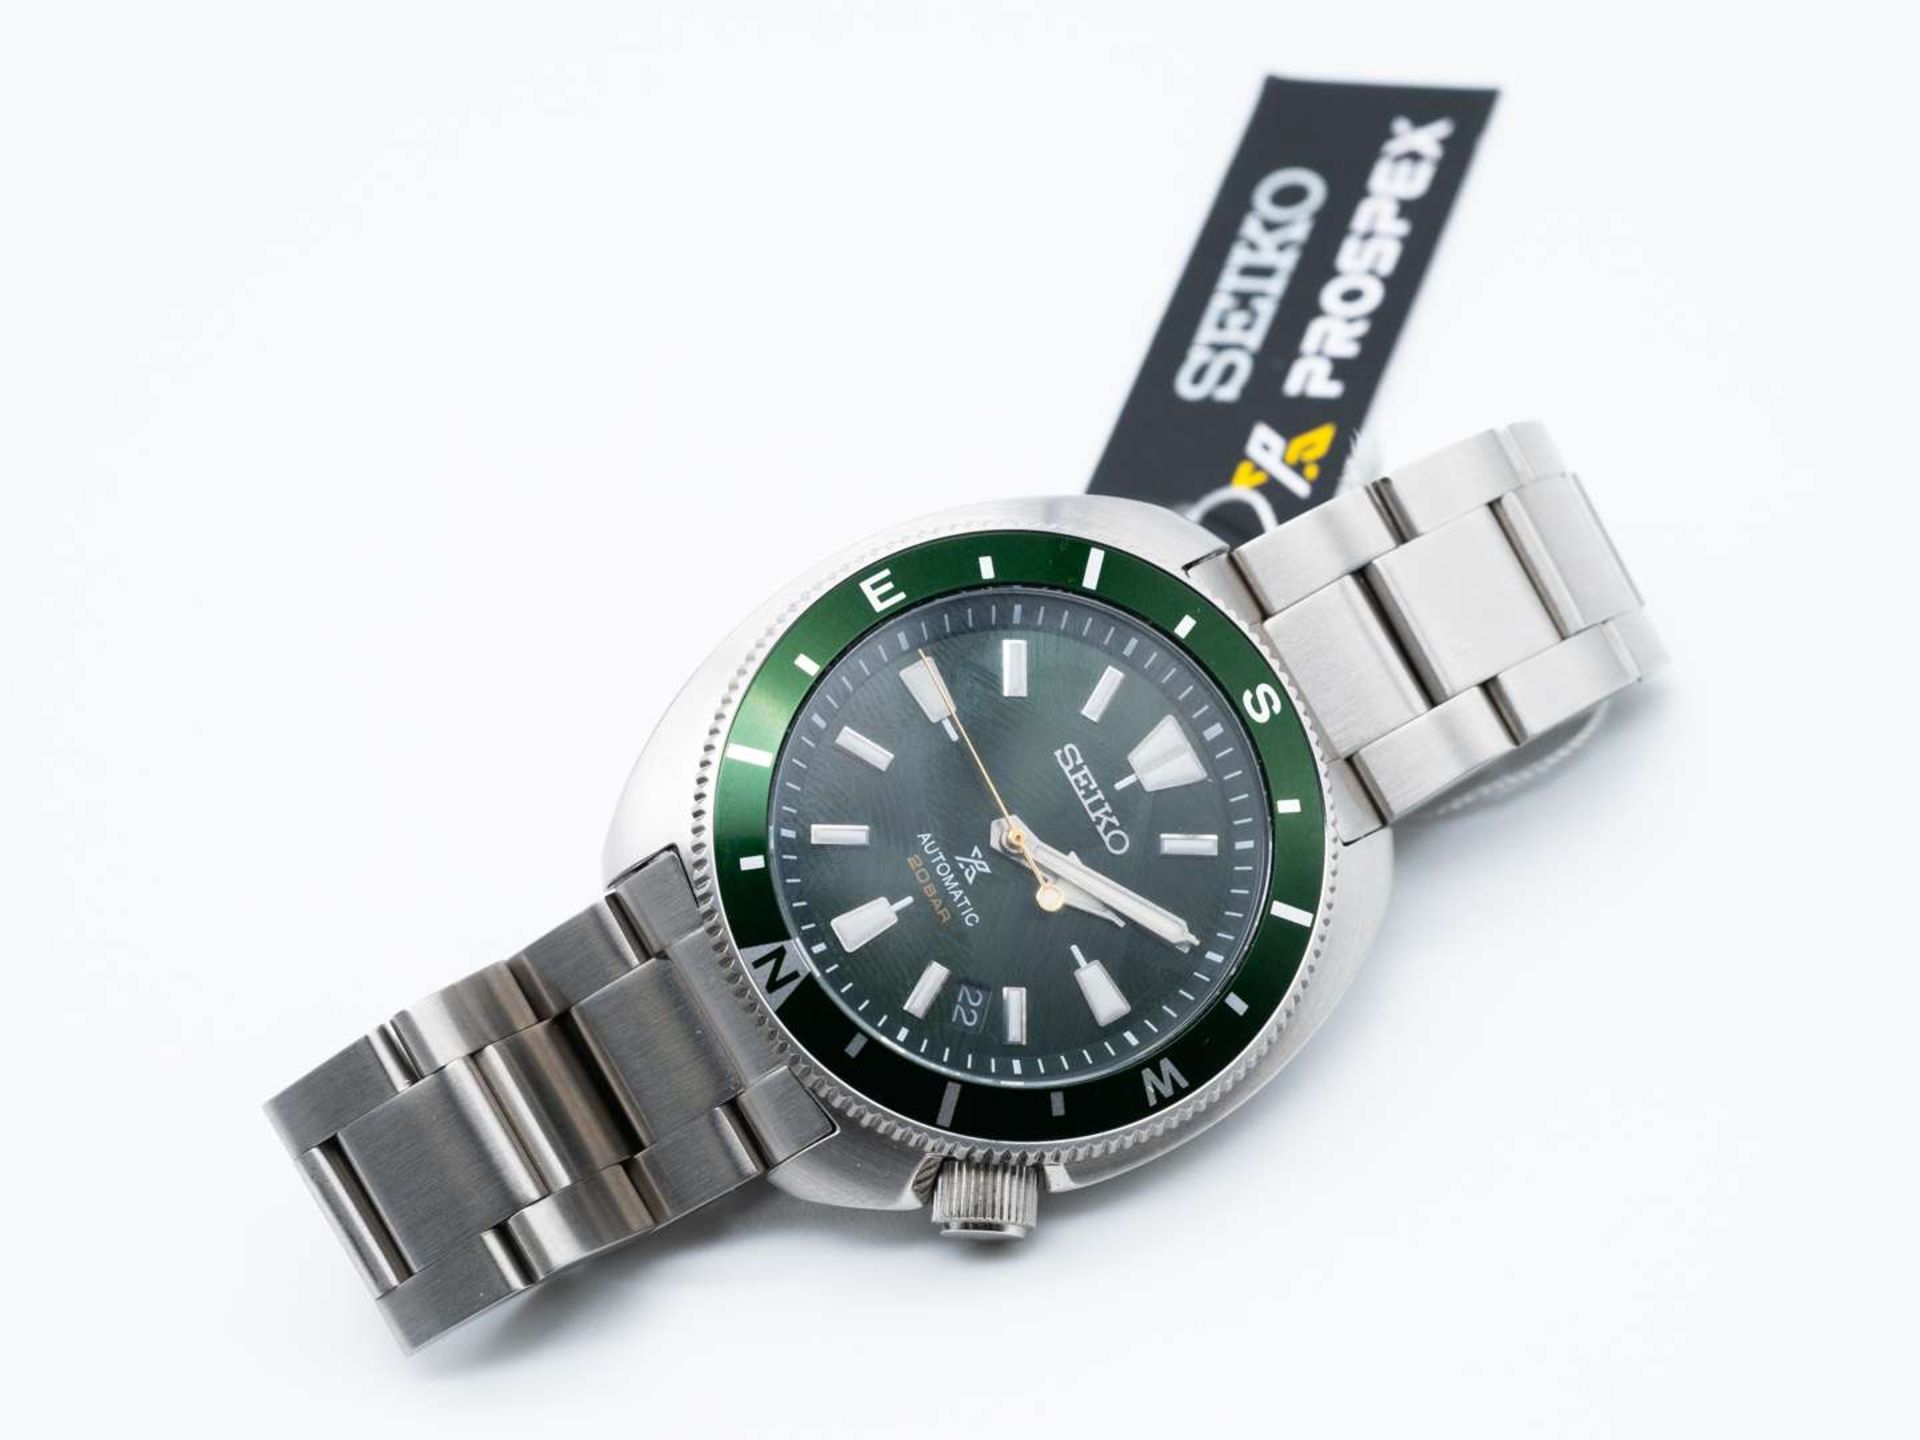 SEIKO, PROSPEX “Turtle”, automatic, stainless steel, centre seconds, calendar, divers watch. - Image 2 of 7